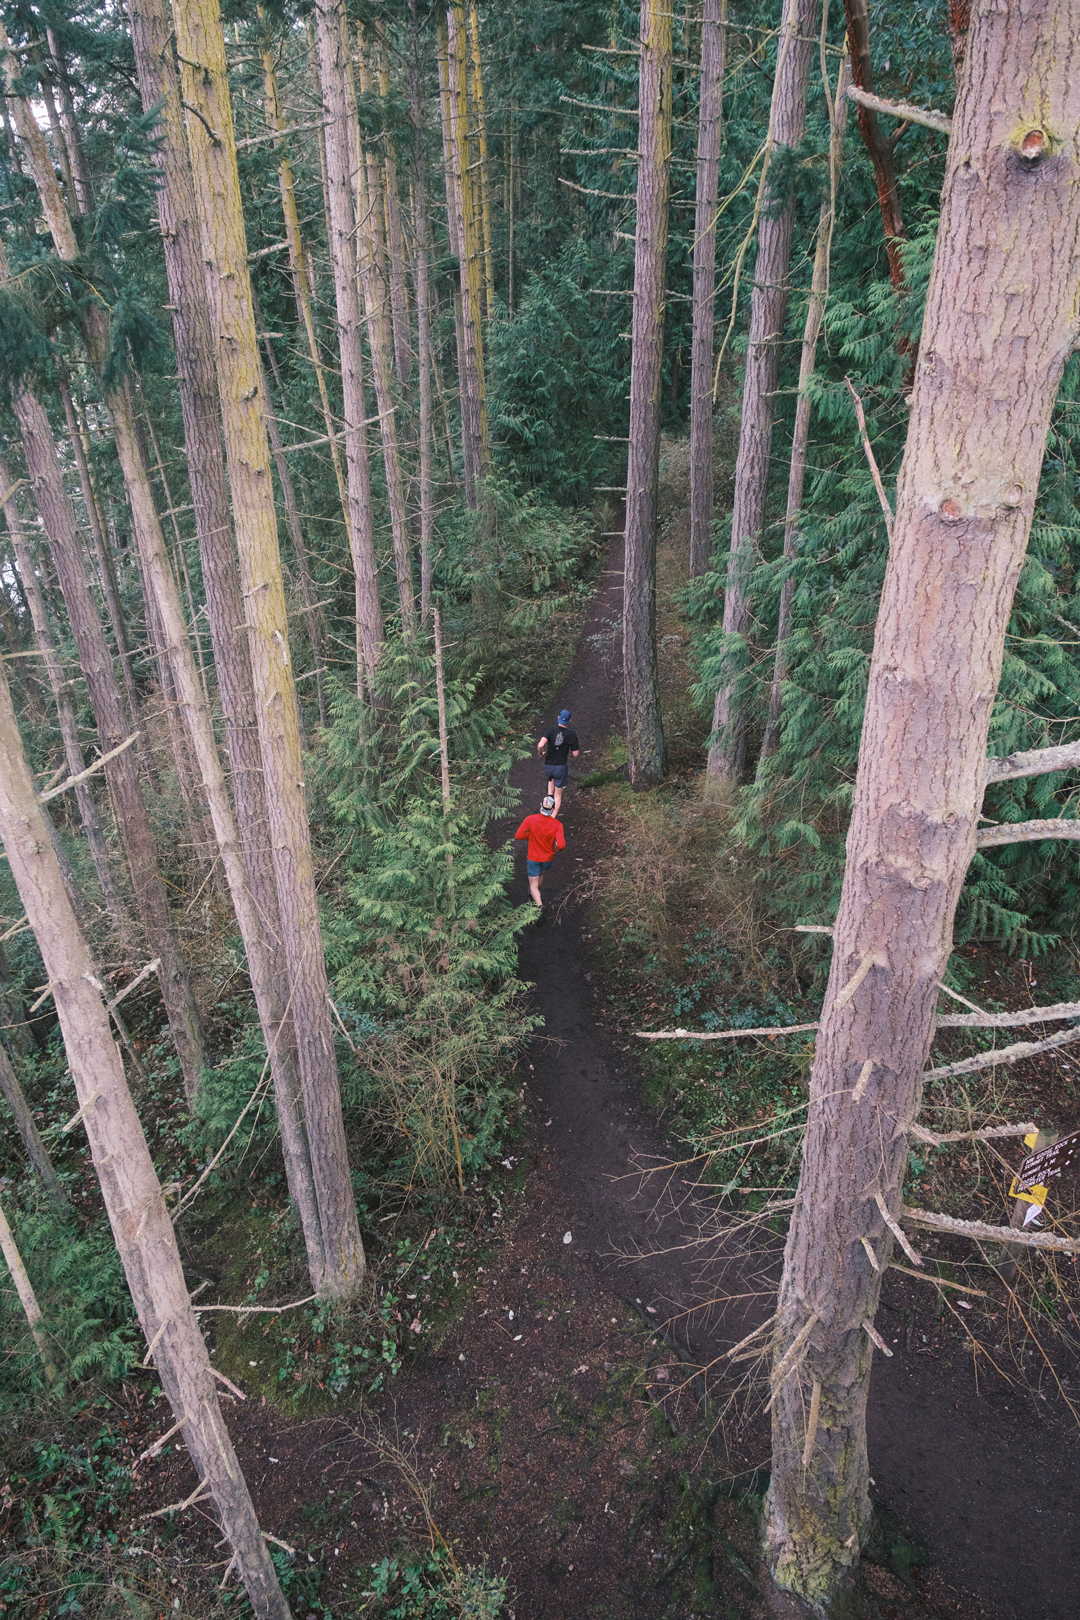  A birds-eye perspective of a runner in the forest 